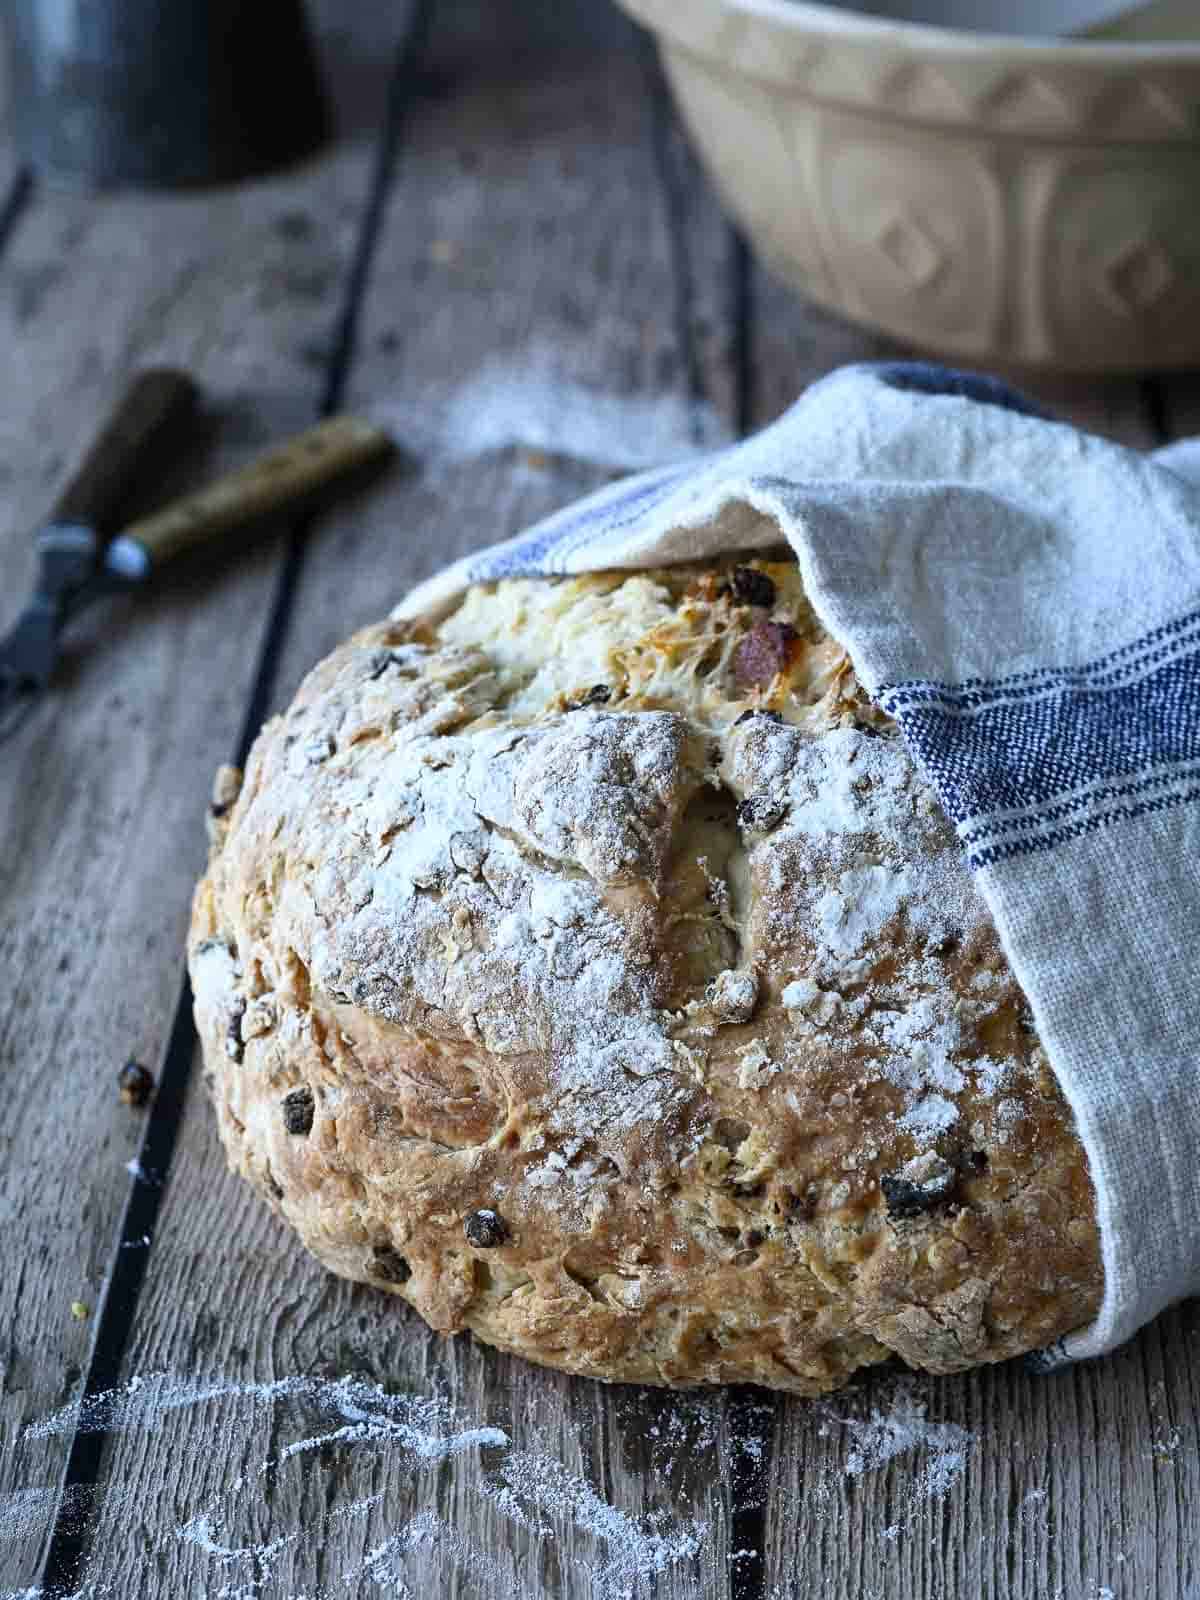 Irish soda bread loaf wrapped in a beige and blue towel on a wood surface.